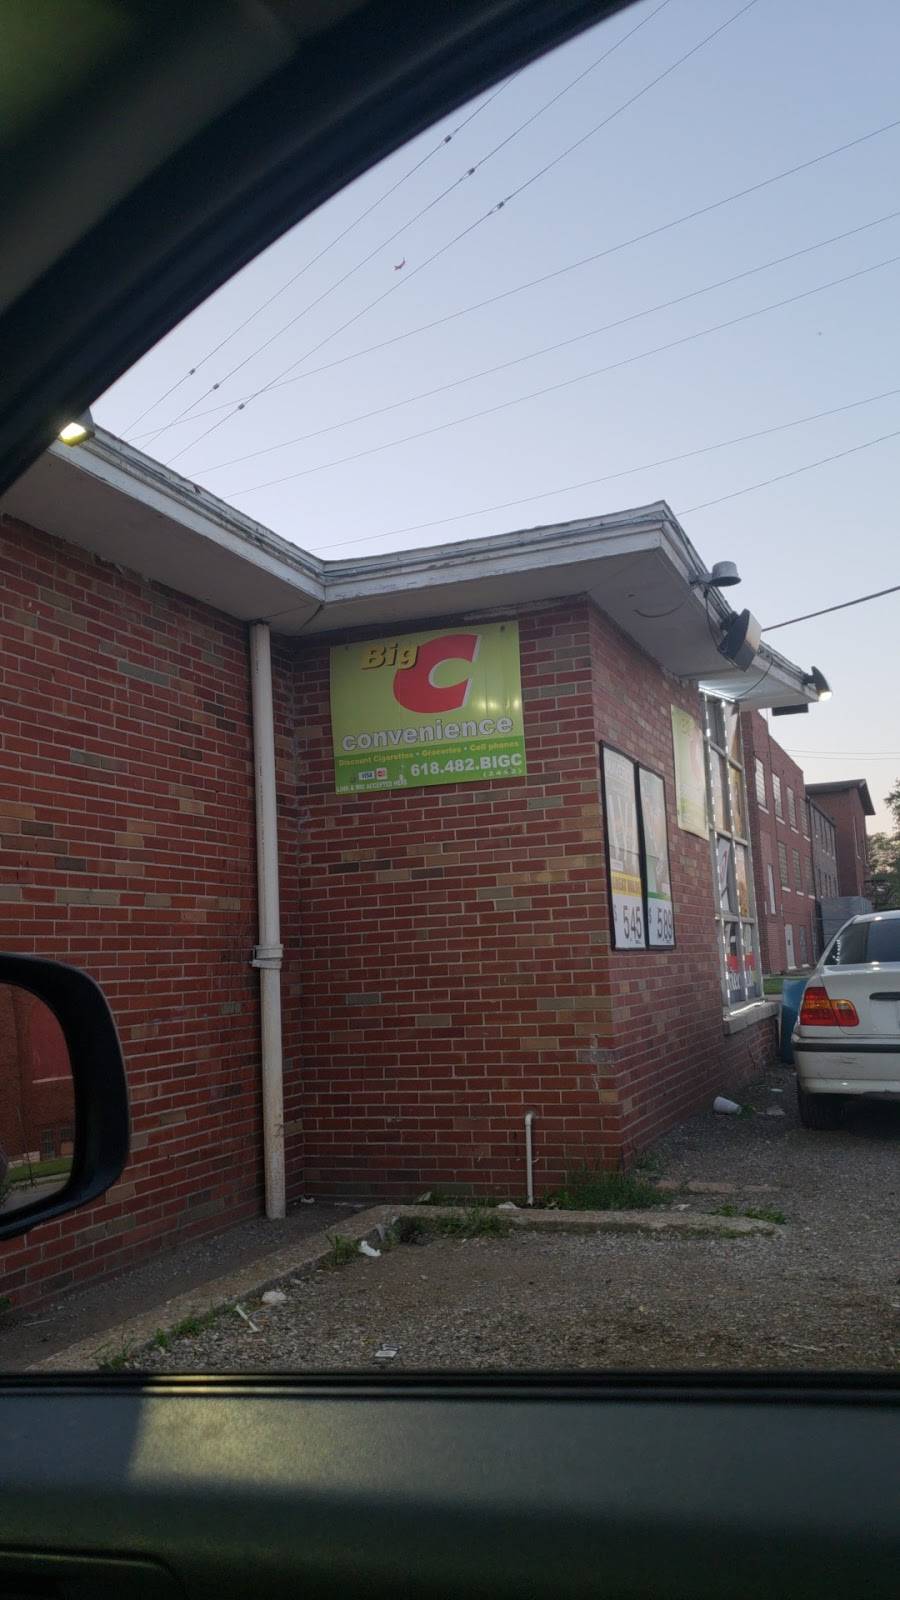 Big C Convenience Inc | restaurant | 2720 State St, East St Louis, IL 62205, USA | 6184822442 OR +1 618-482-2442